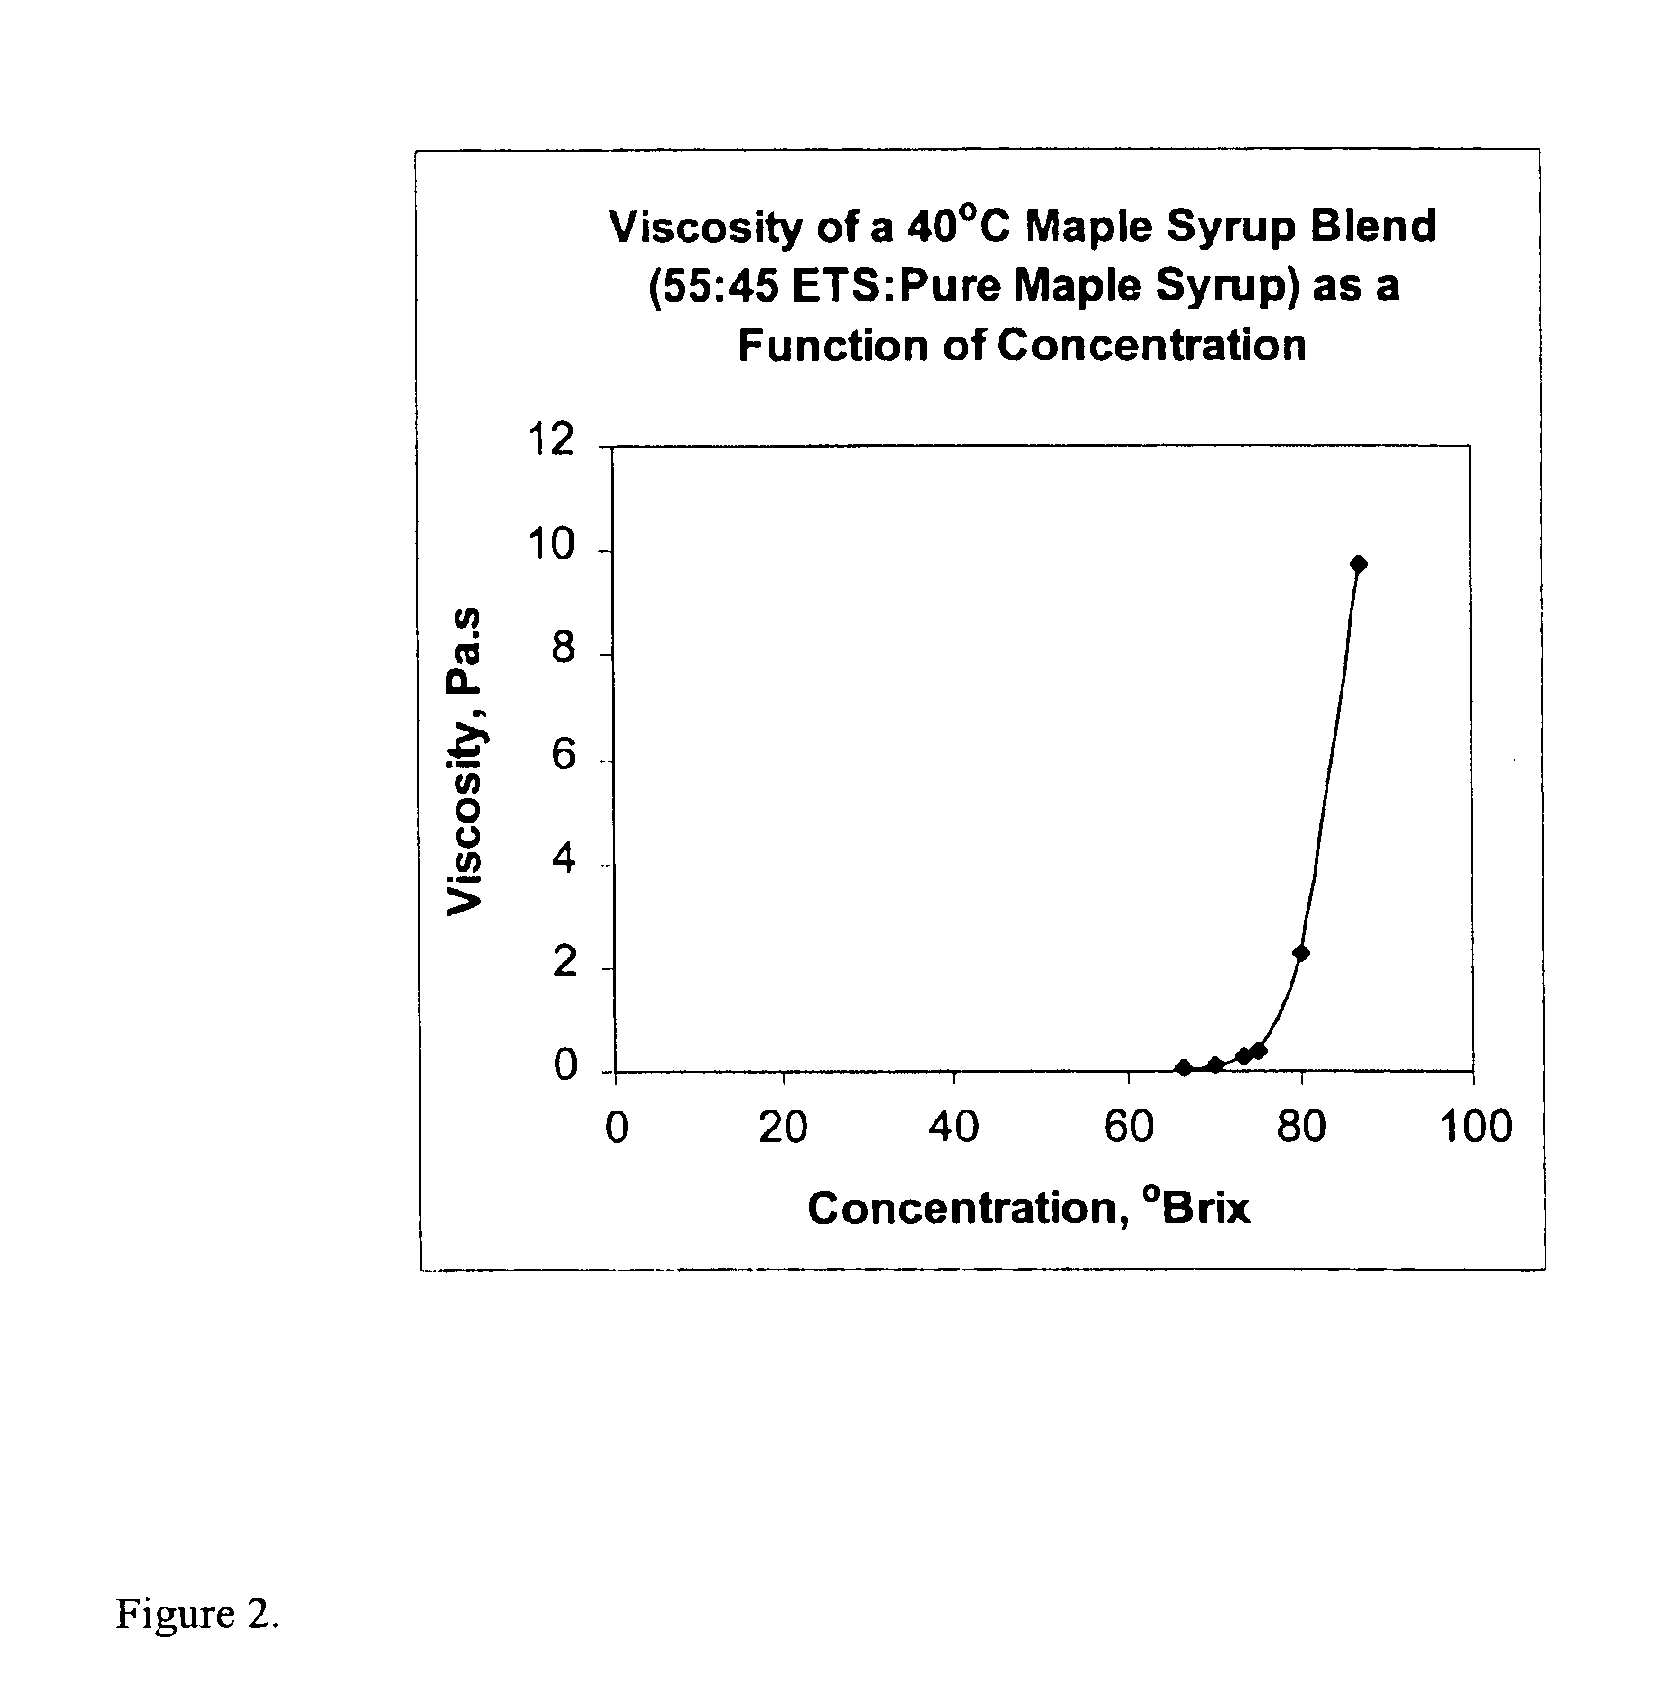 Enzyme treated maple syrup and shelf stable products containing enzyme treated maple syrup